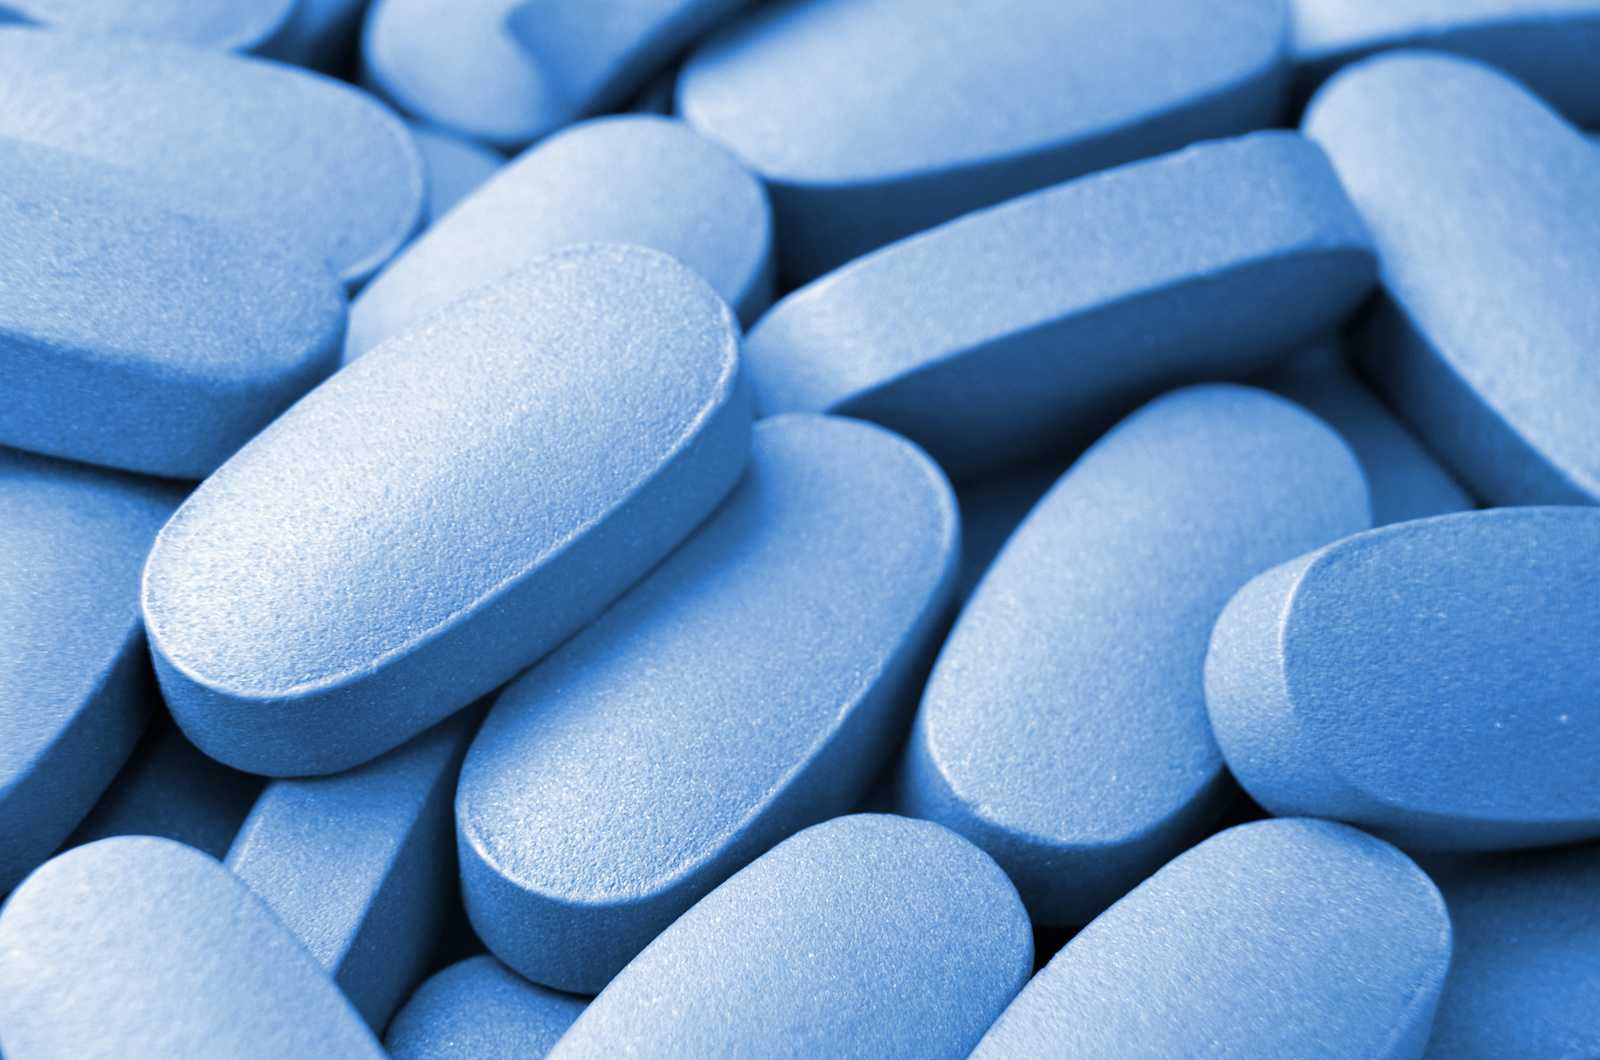 Blue Xanax: Side Effects, Withdrawal Symptoms, and Treatment Options for Addiction